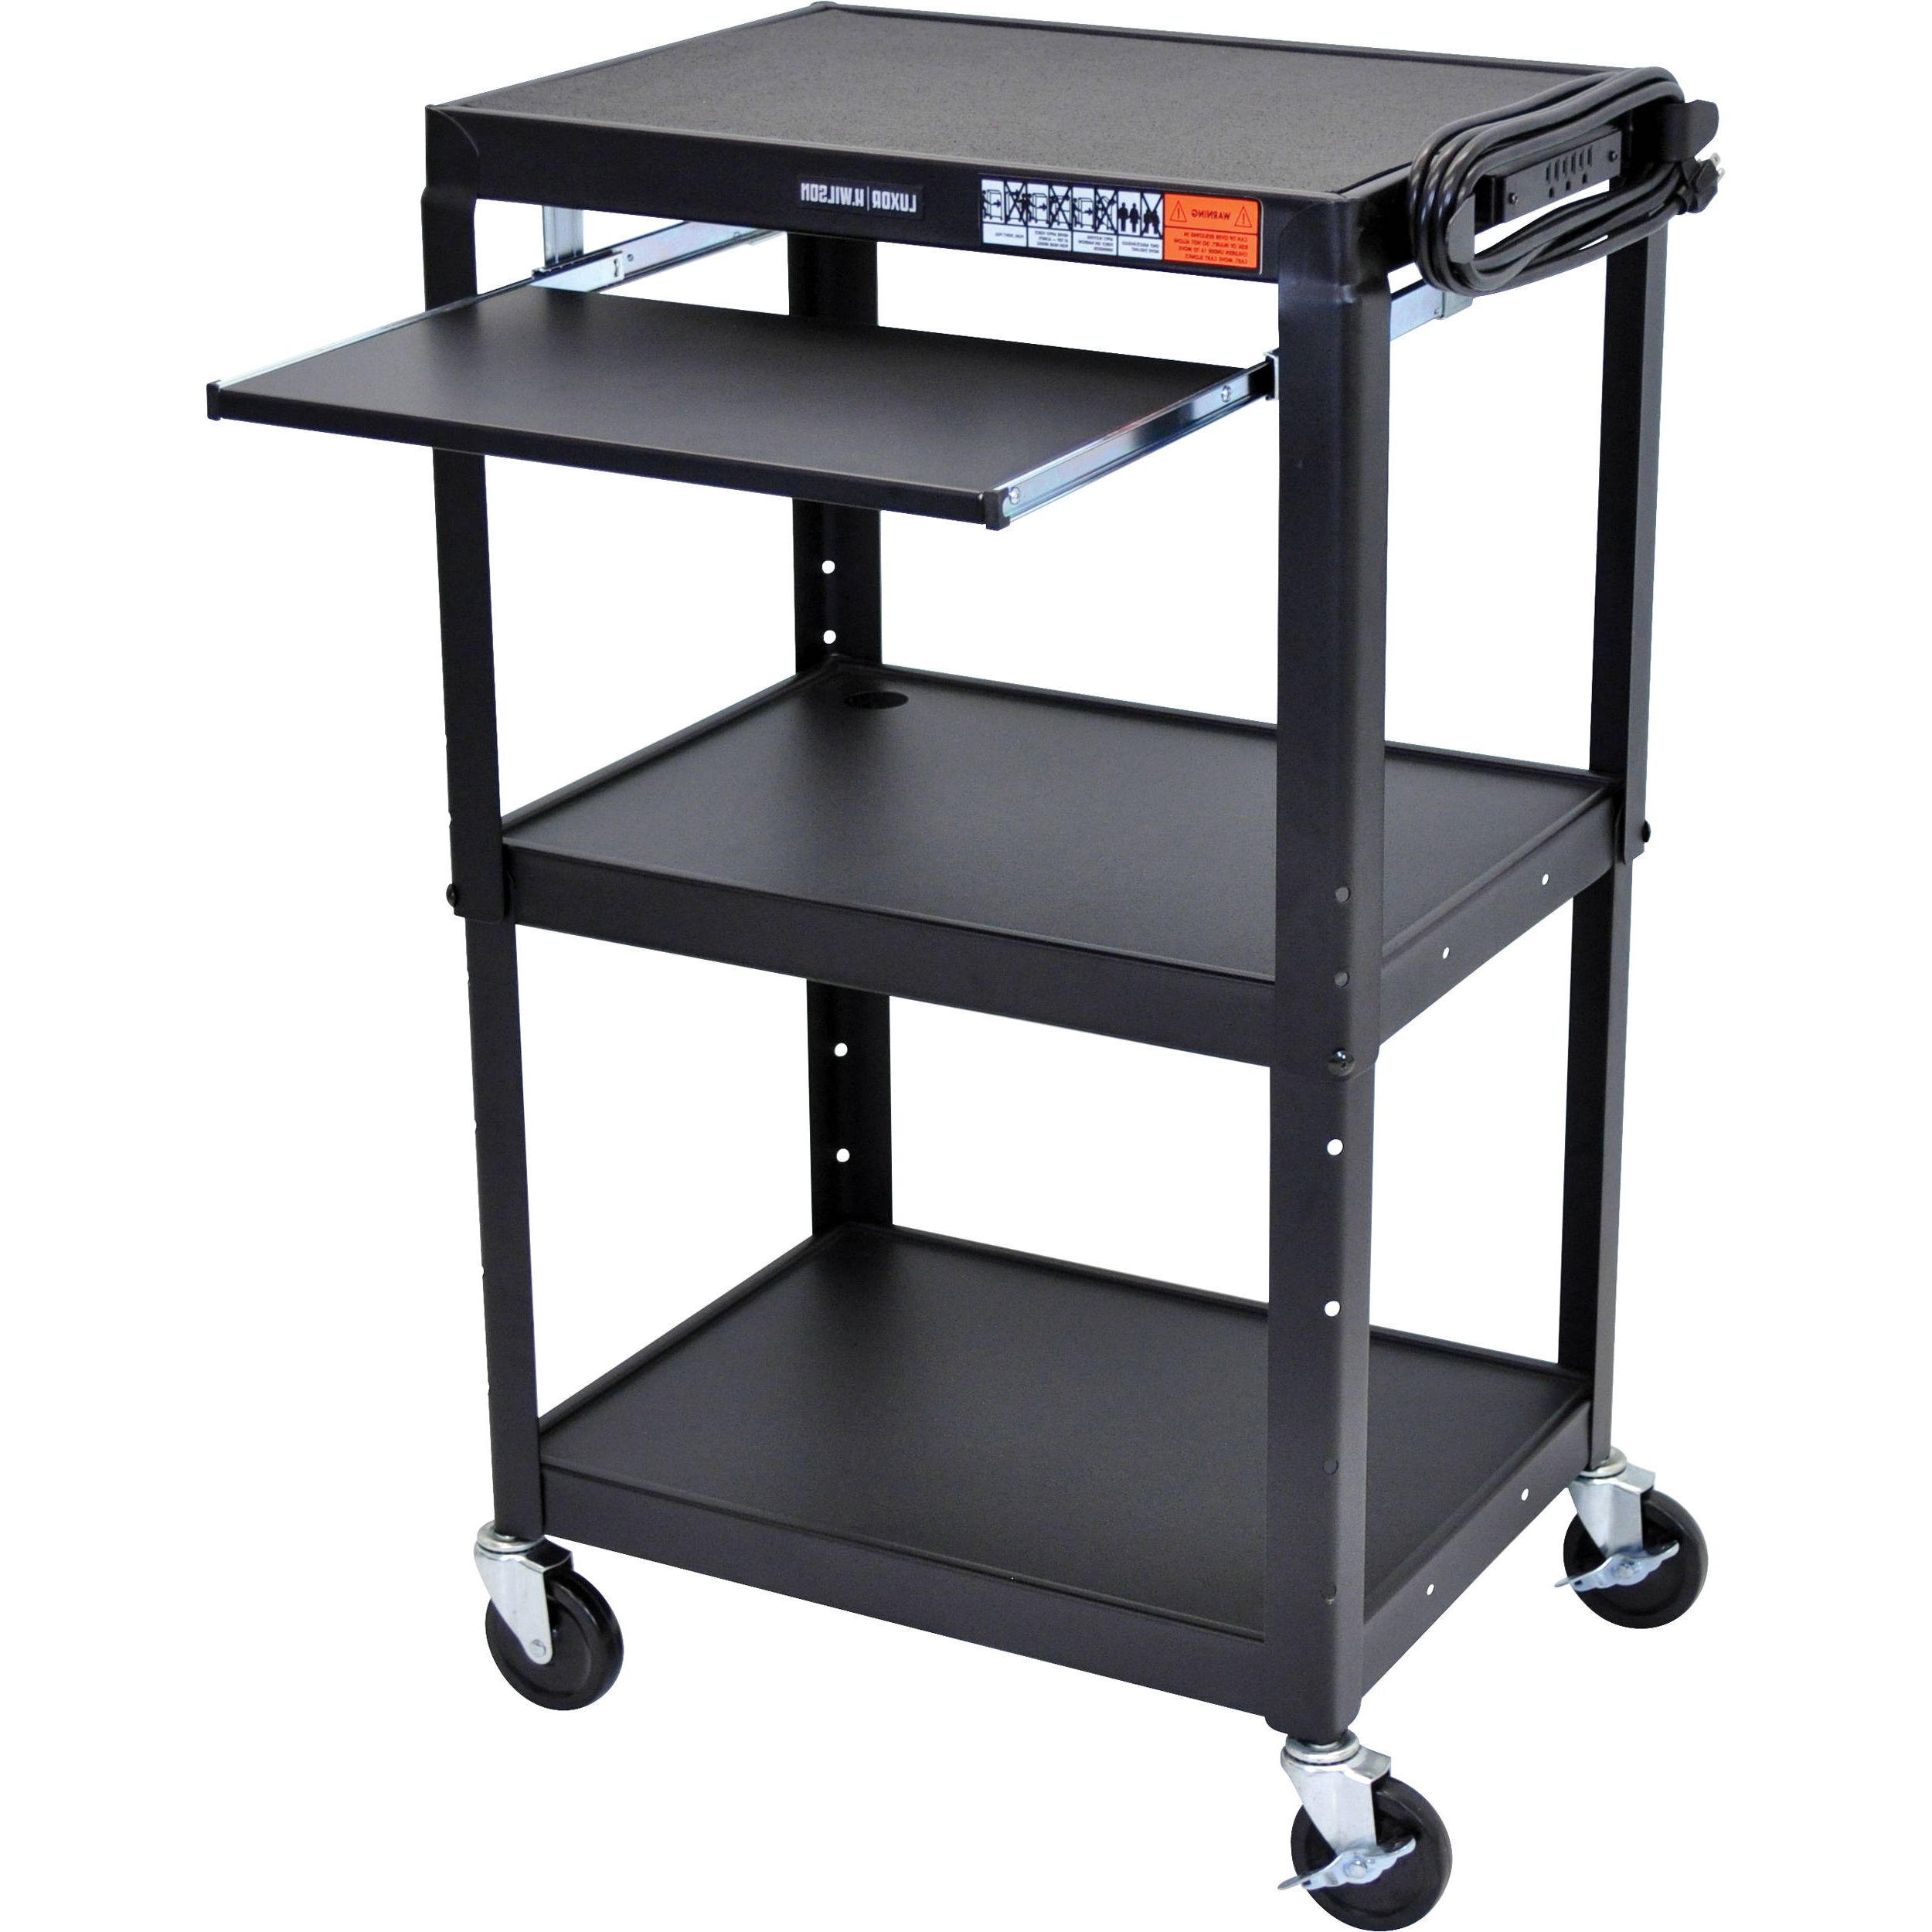 Luxor Avj42kb Steel Adjustable A/v Cart With Pull Out Avj42kb Within Modern Mobile Rolling Tv Stands With Metal Shelf Black Finish (View 8 of 20)